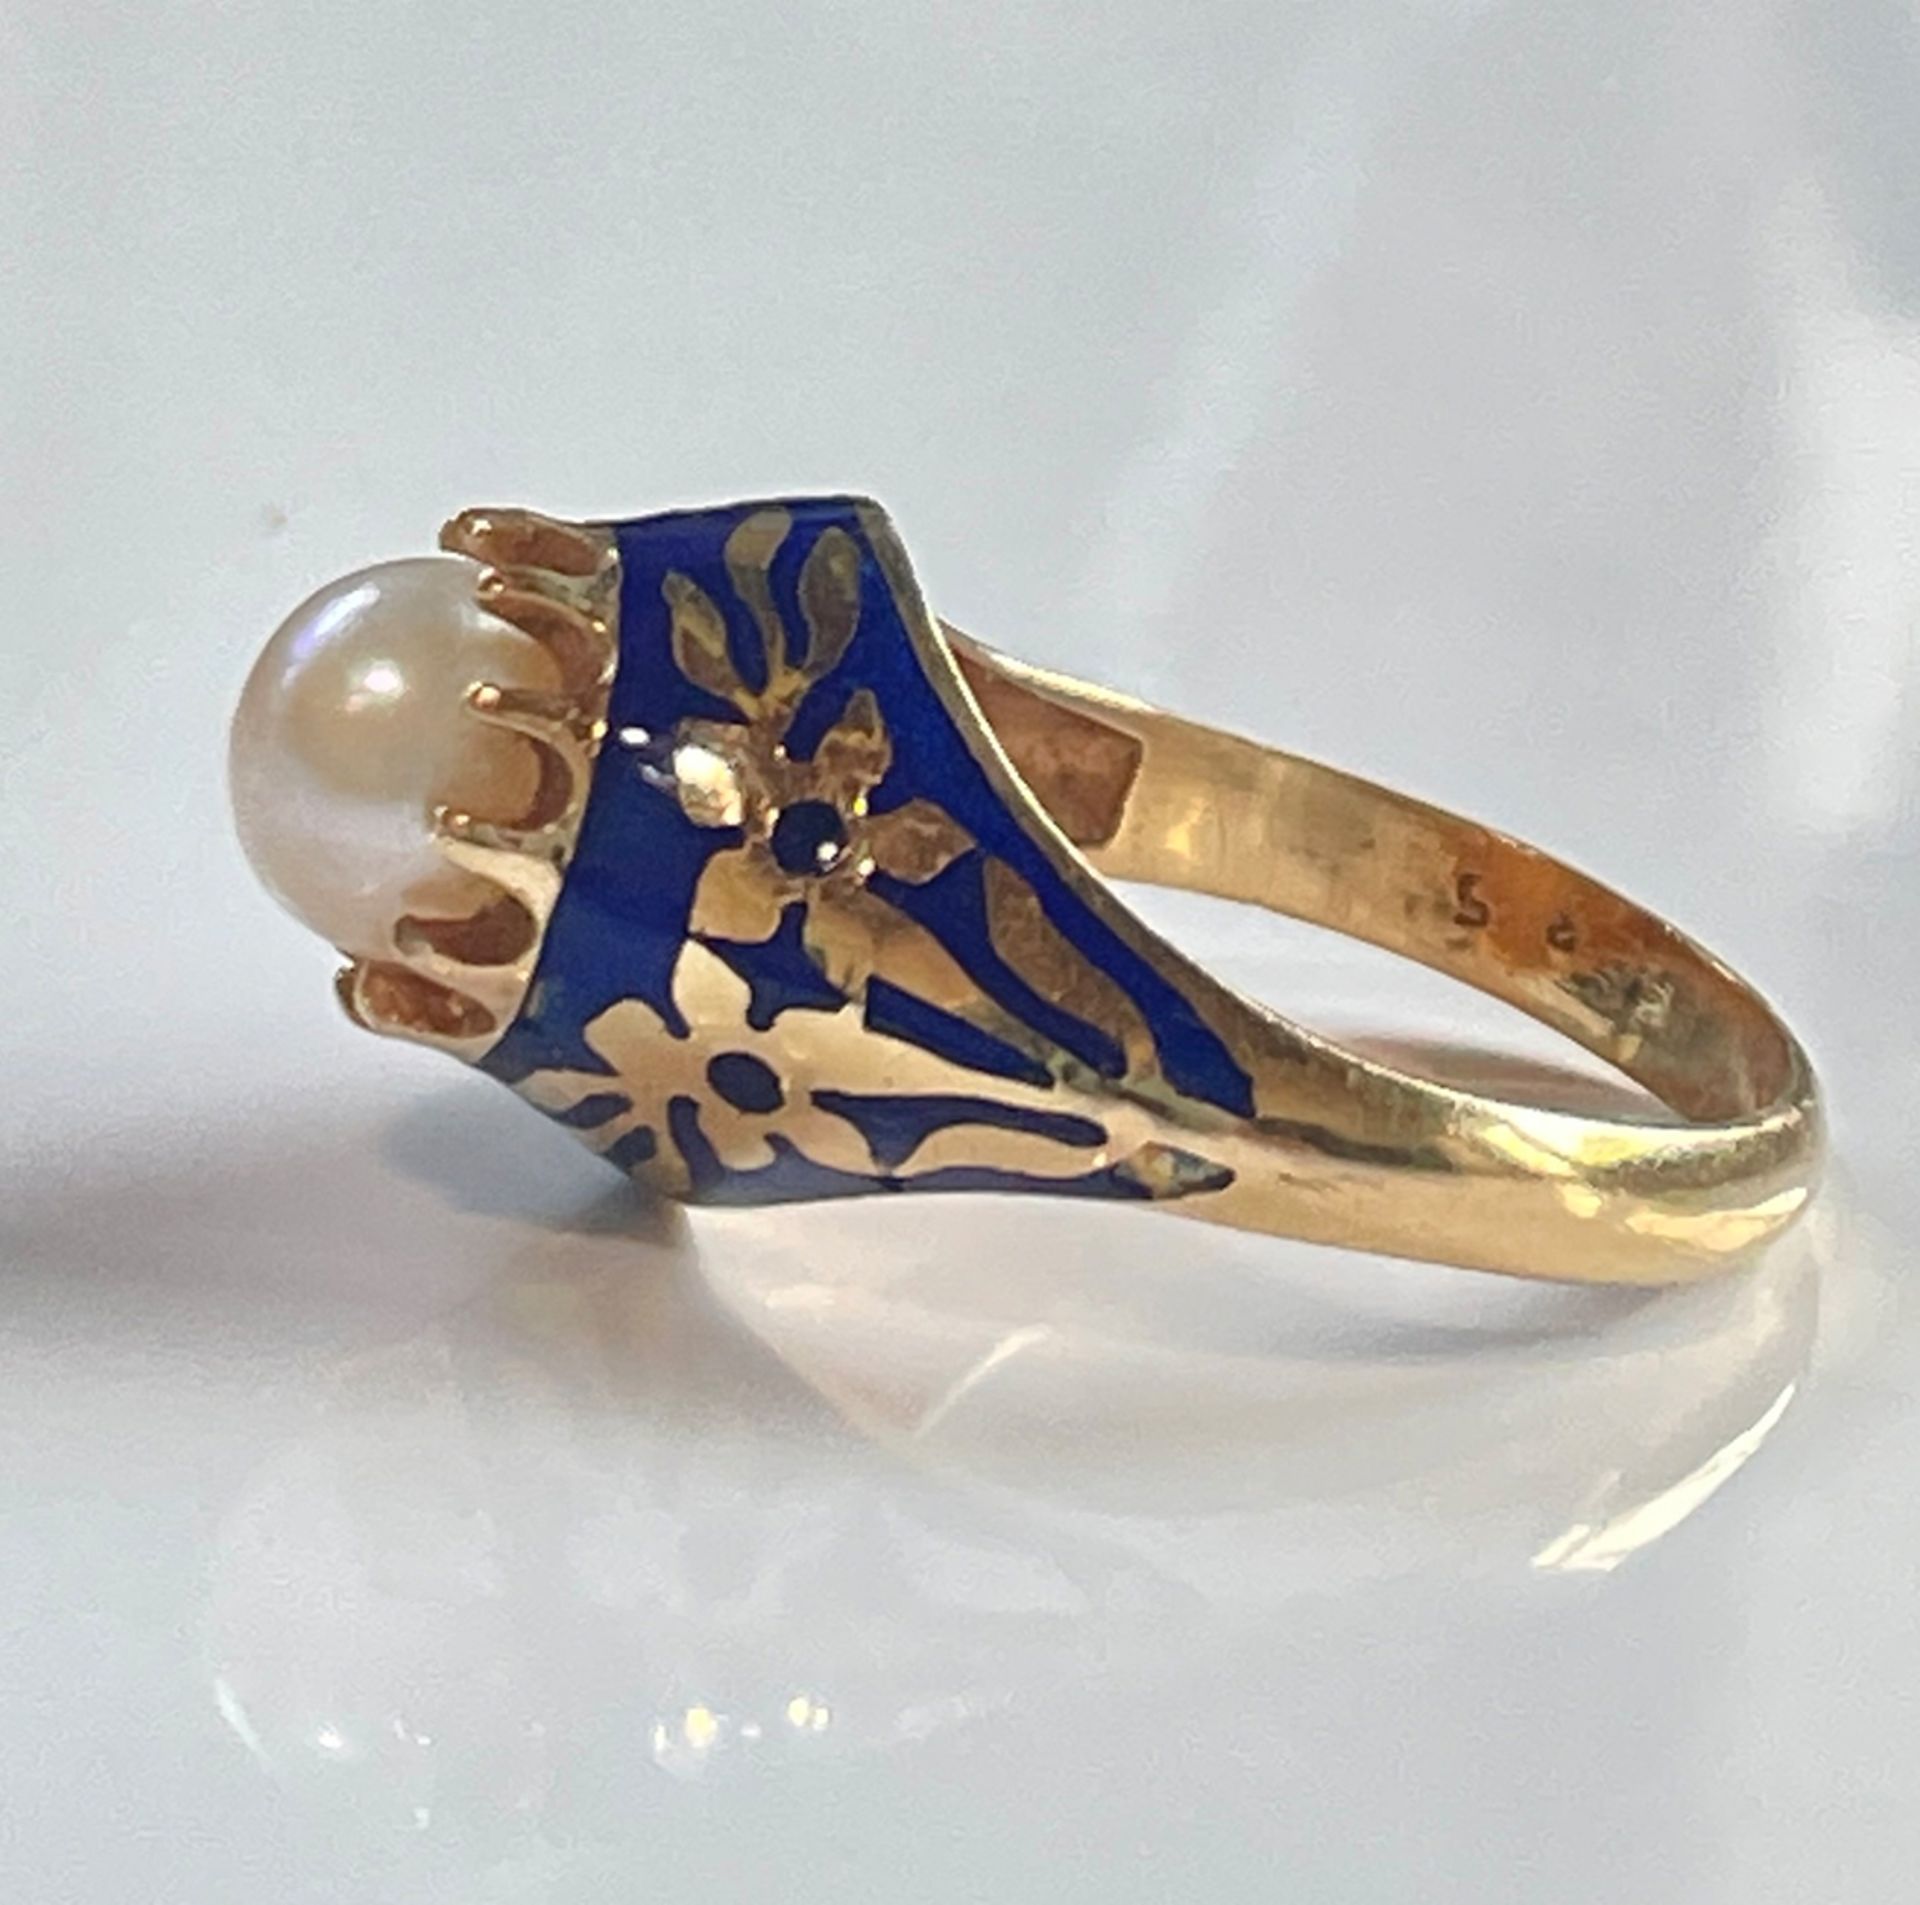 Antique ring of 18K Gold with Enamel and a Pearl - Image 5 of 5